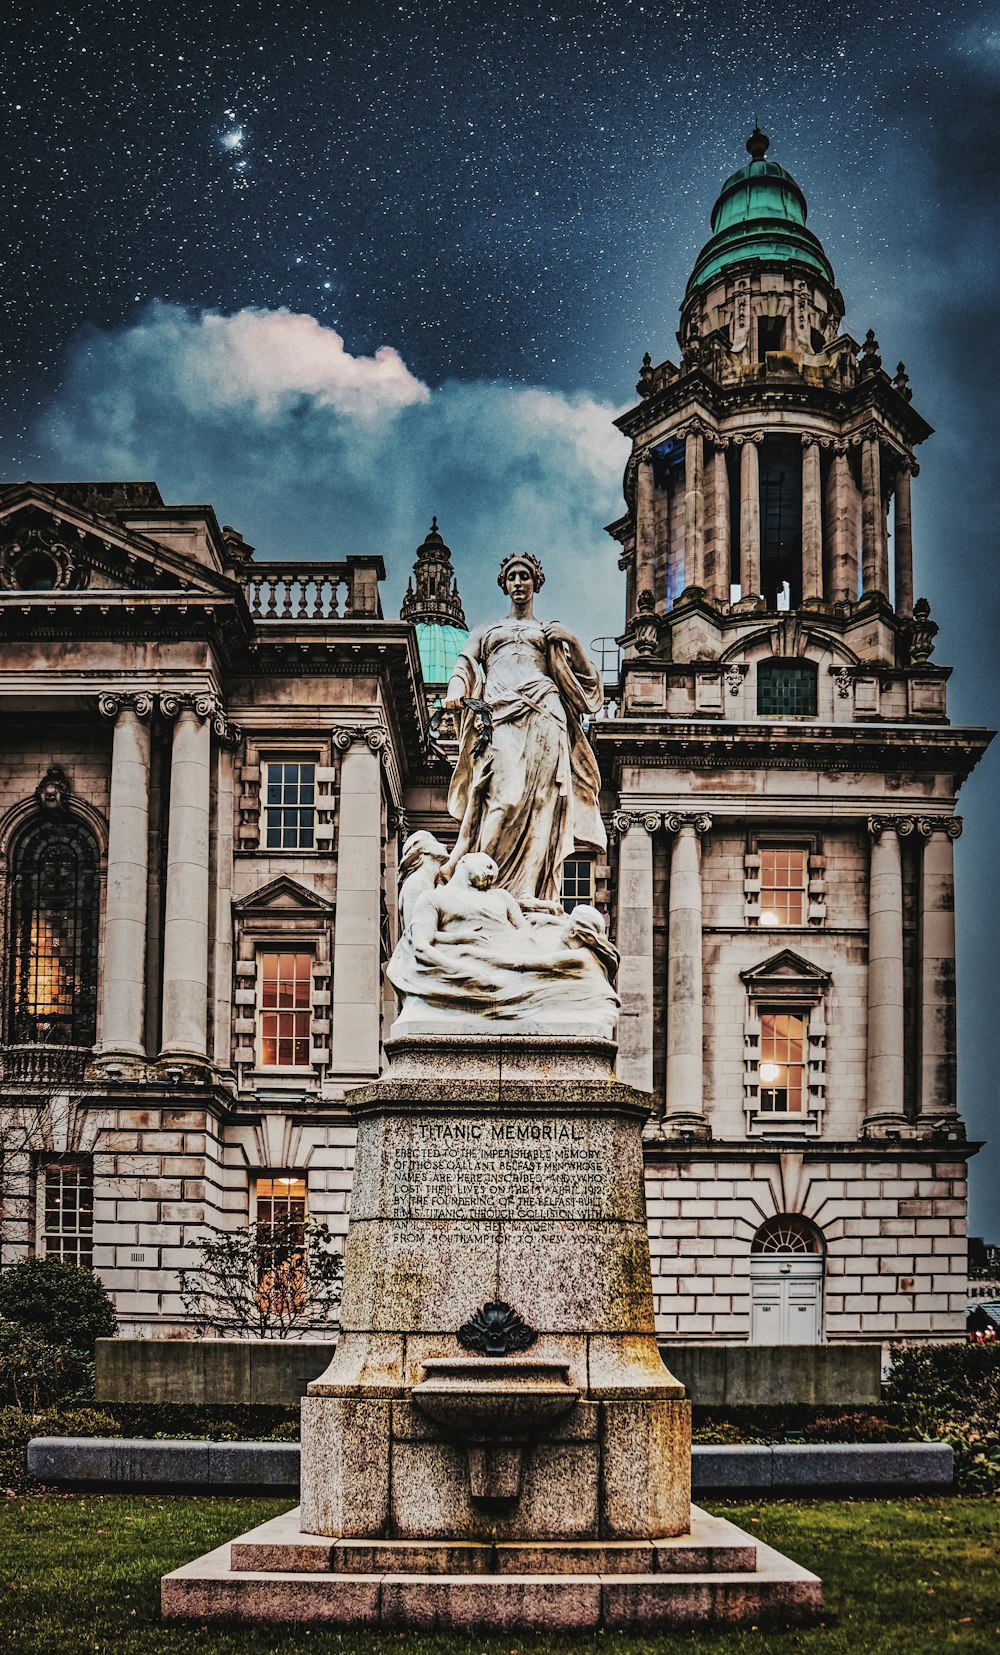 a statue in front of a large building